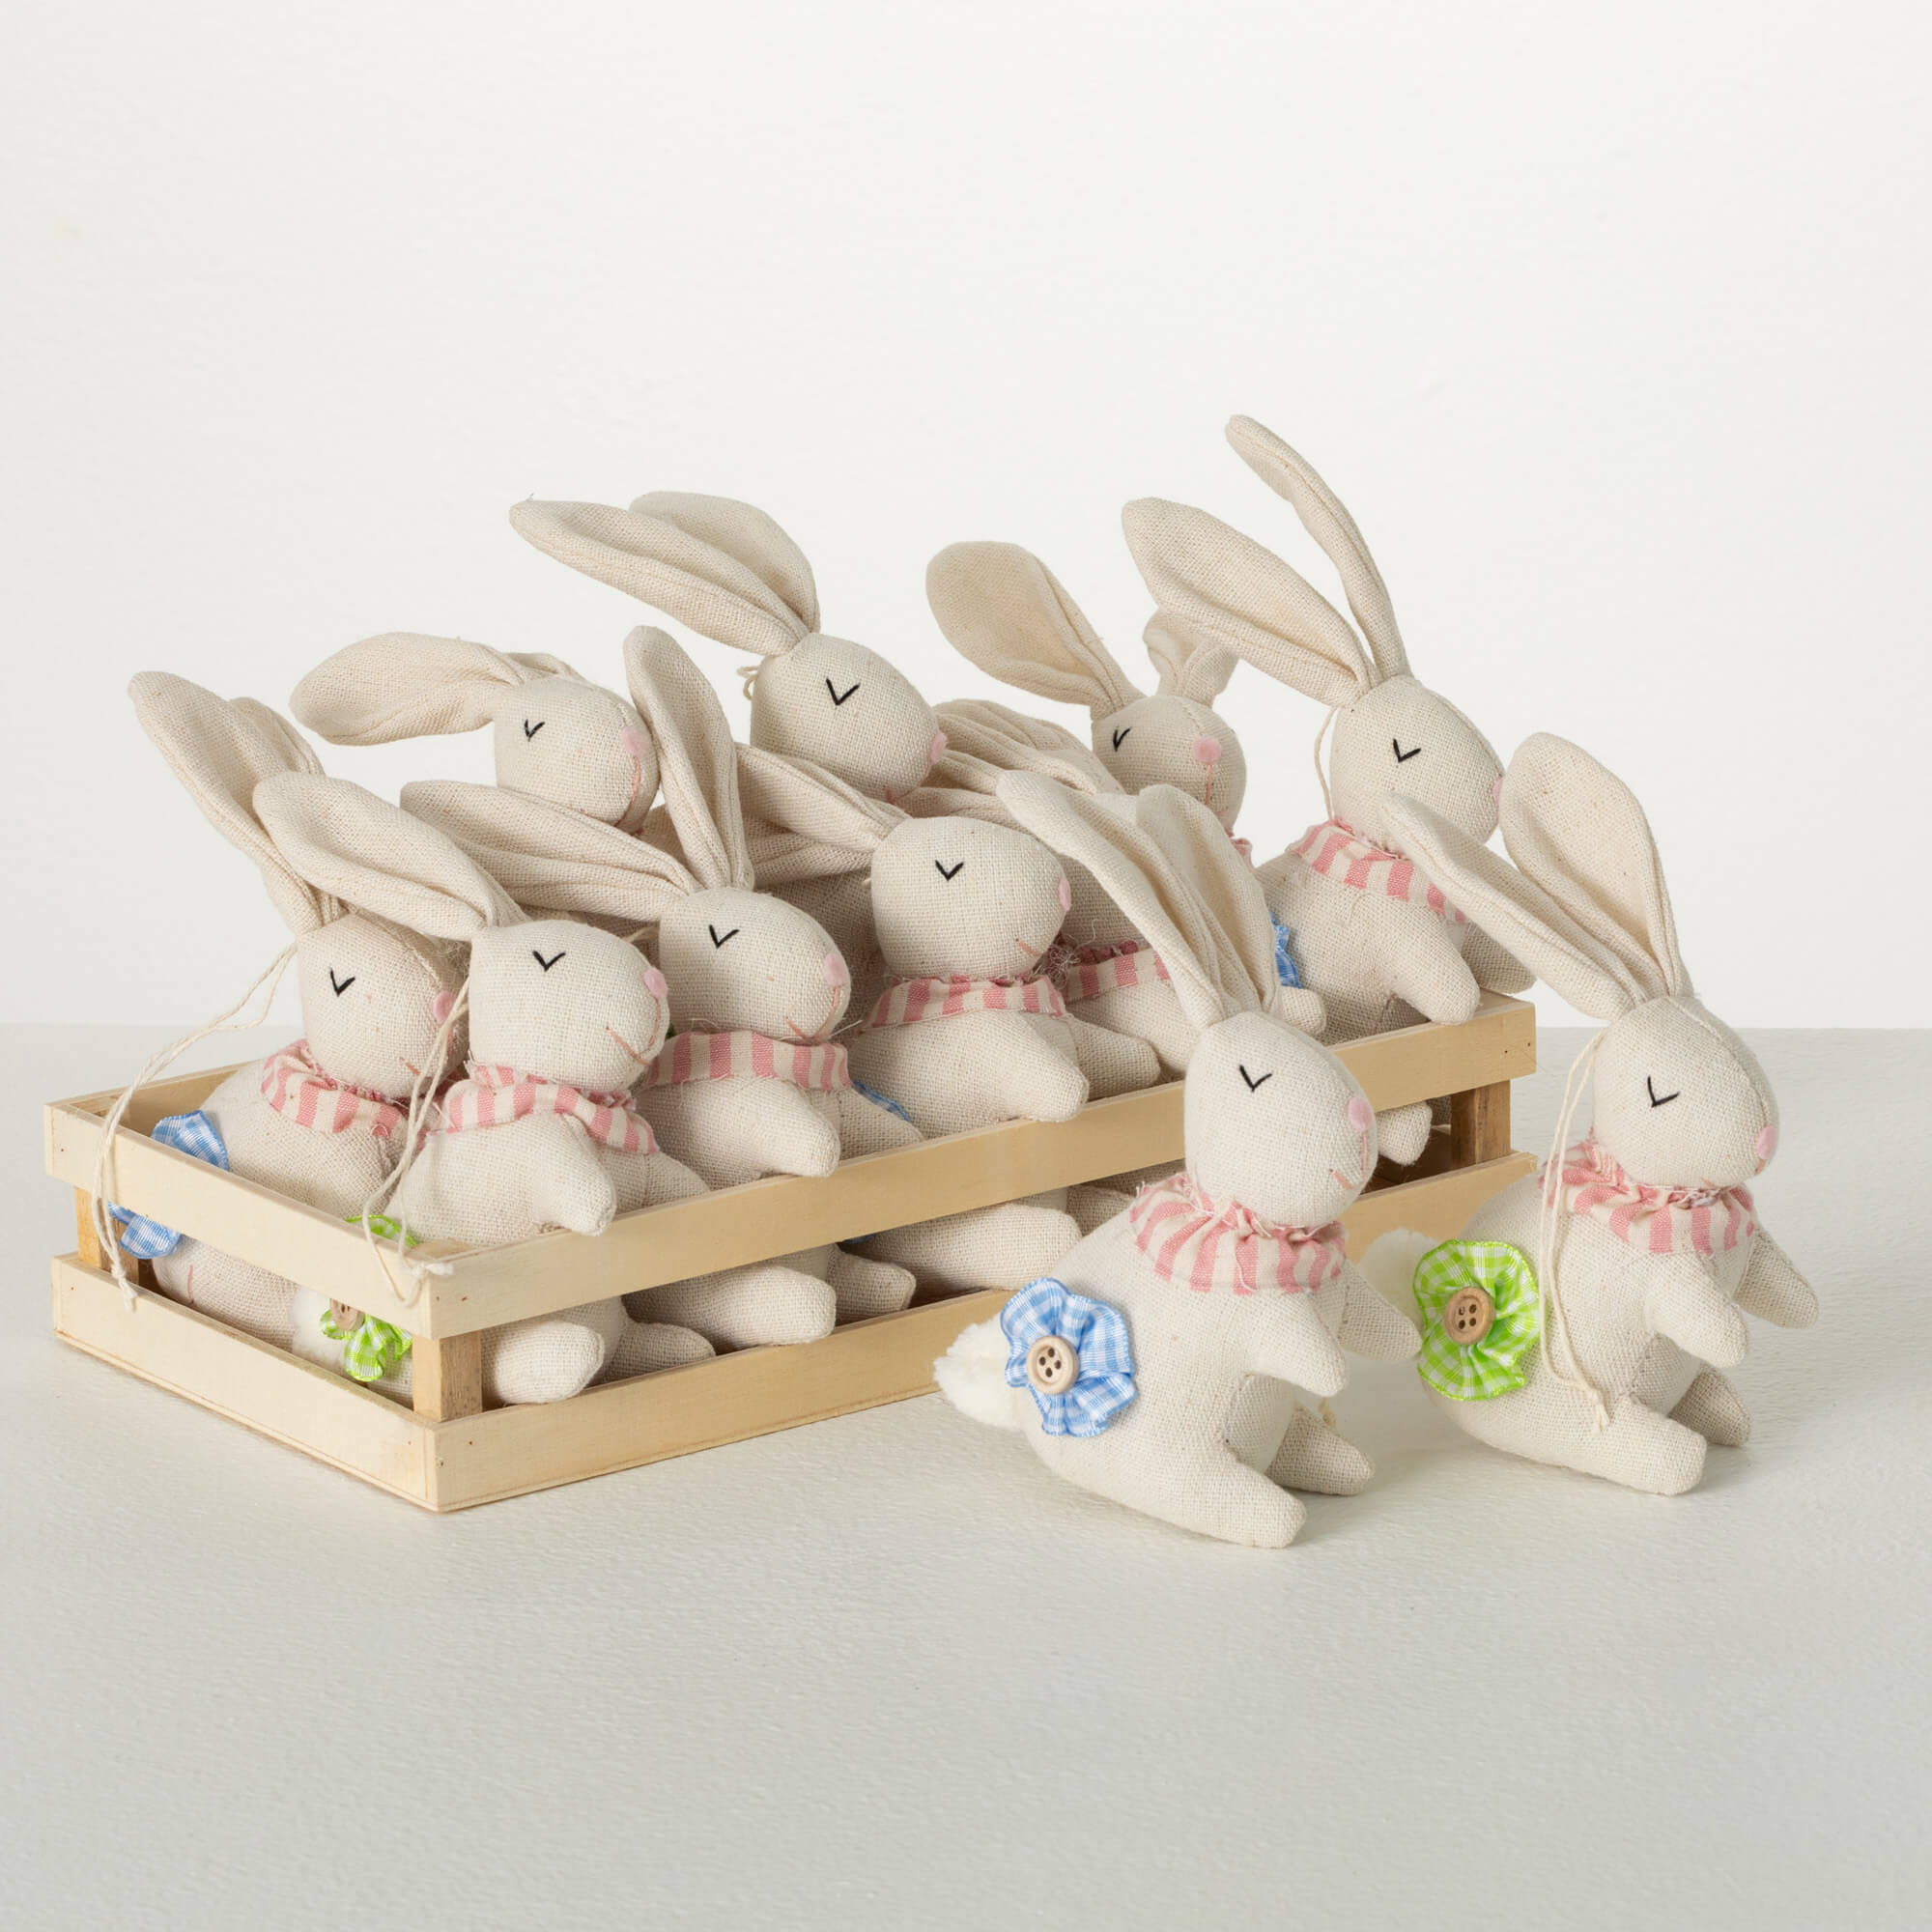 Bunny Character Minis - Zinnias Gift Boutique